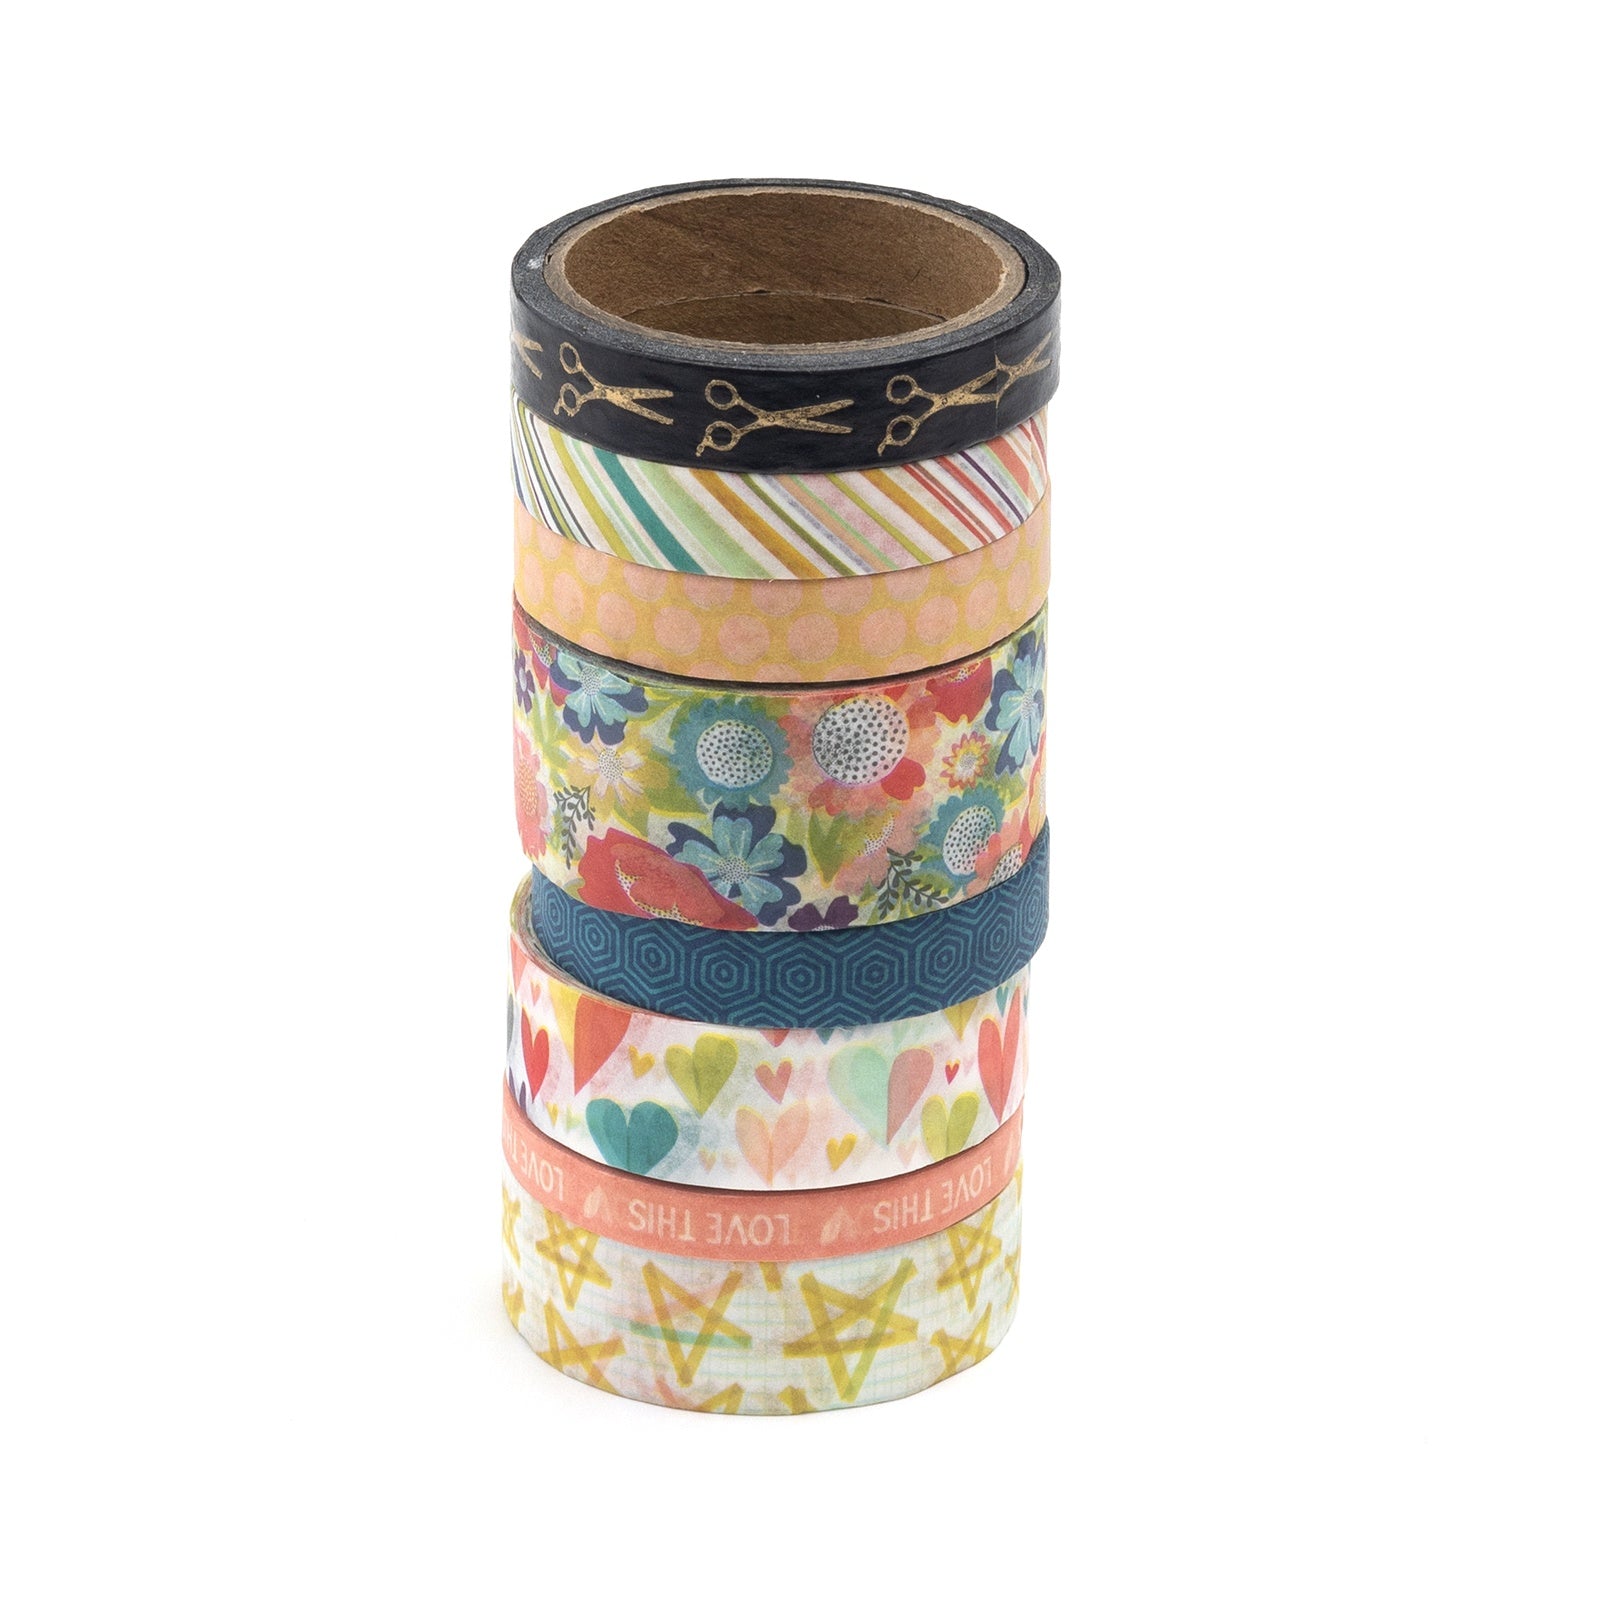 Baker Ross AX697 Pastel Washi Tape - Pack of 10, Sticky and Decorative for Card Craft, Scrapbooking and Arts and Crafts for Kids